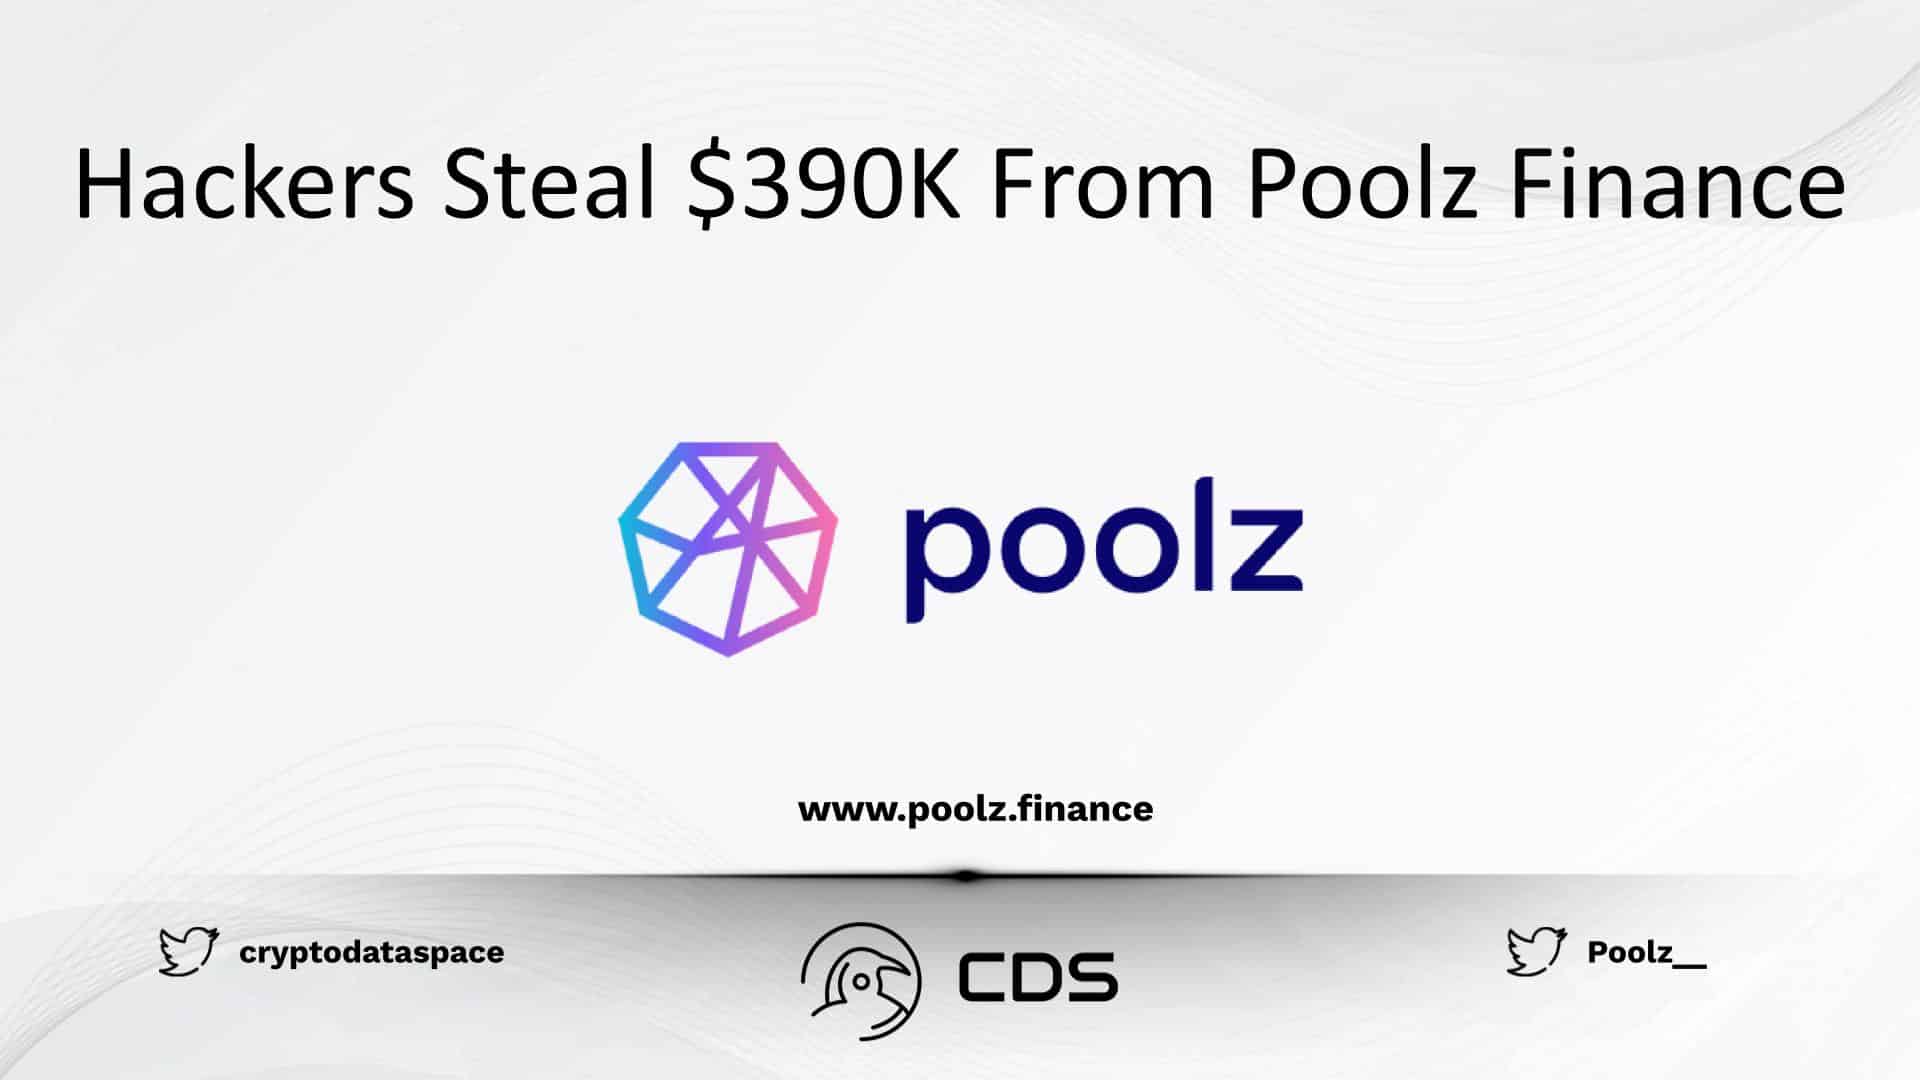 Hackers Steal $390K From Poolz Finance